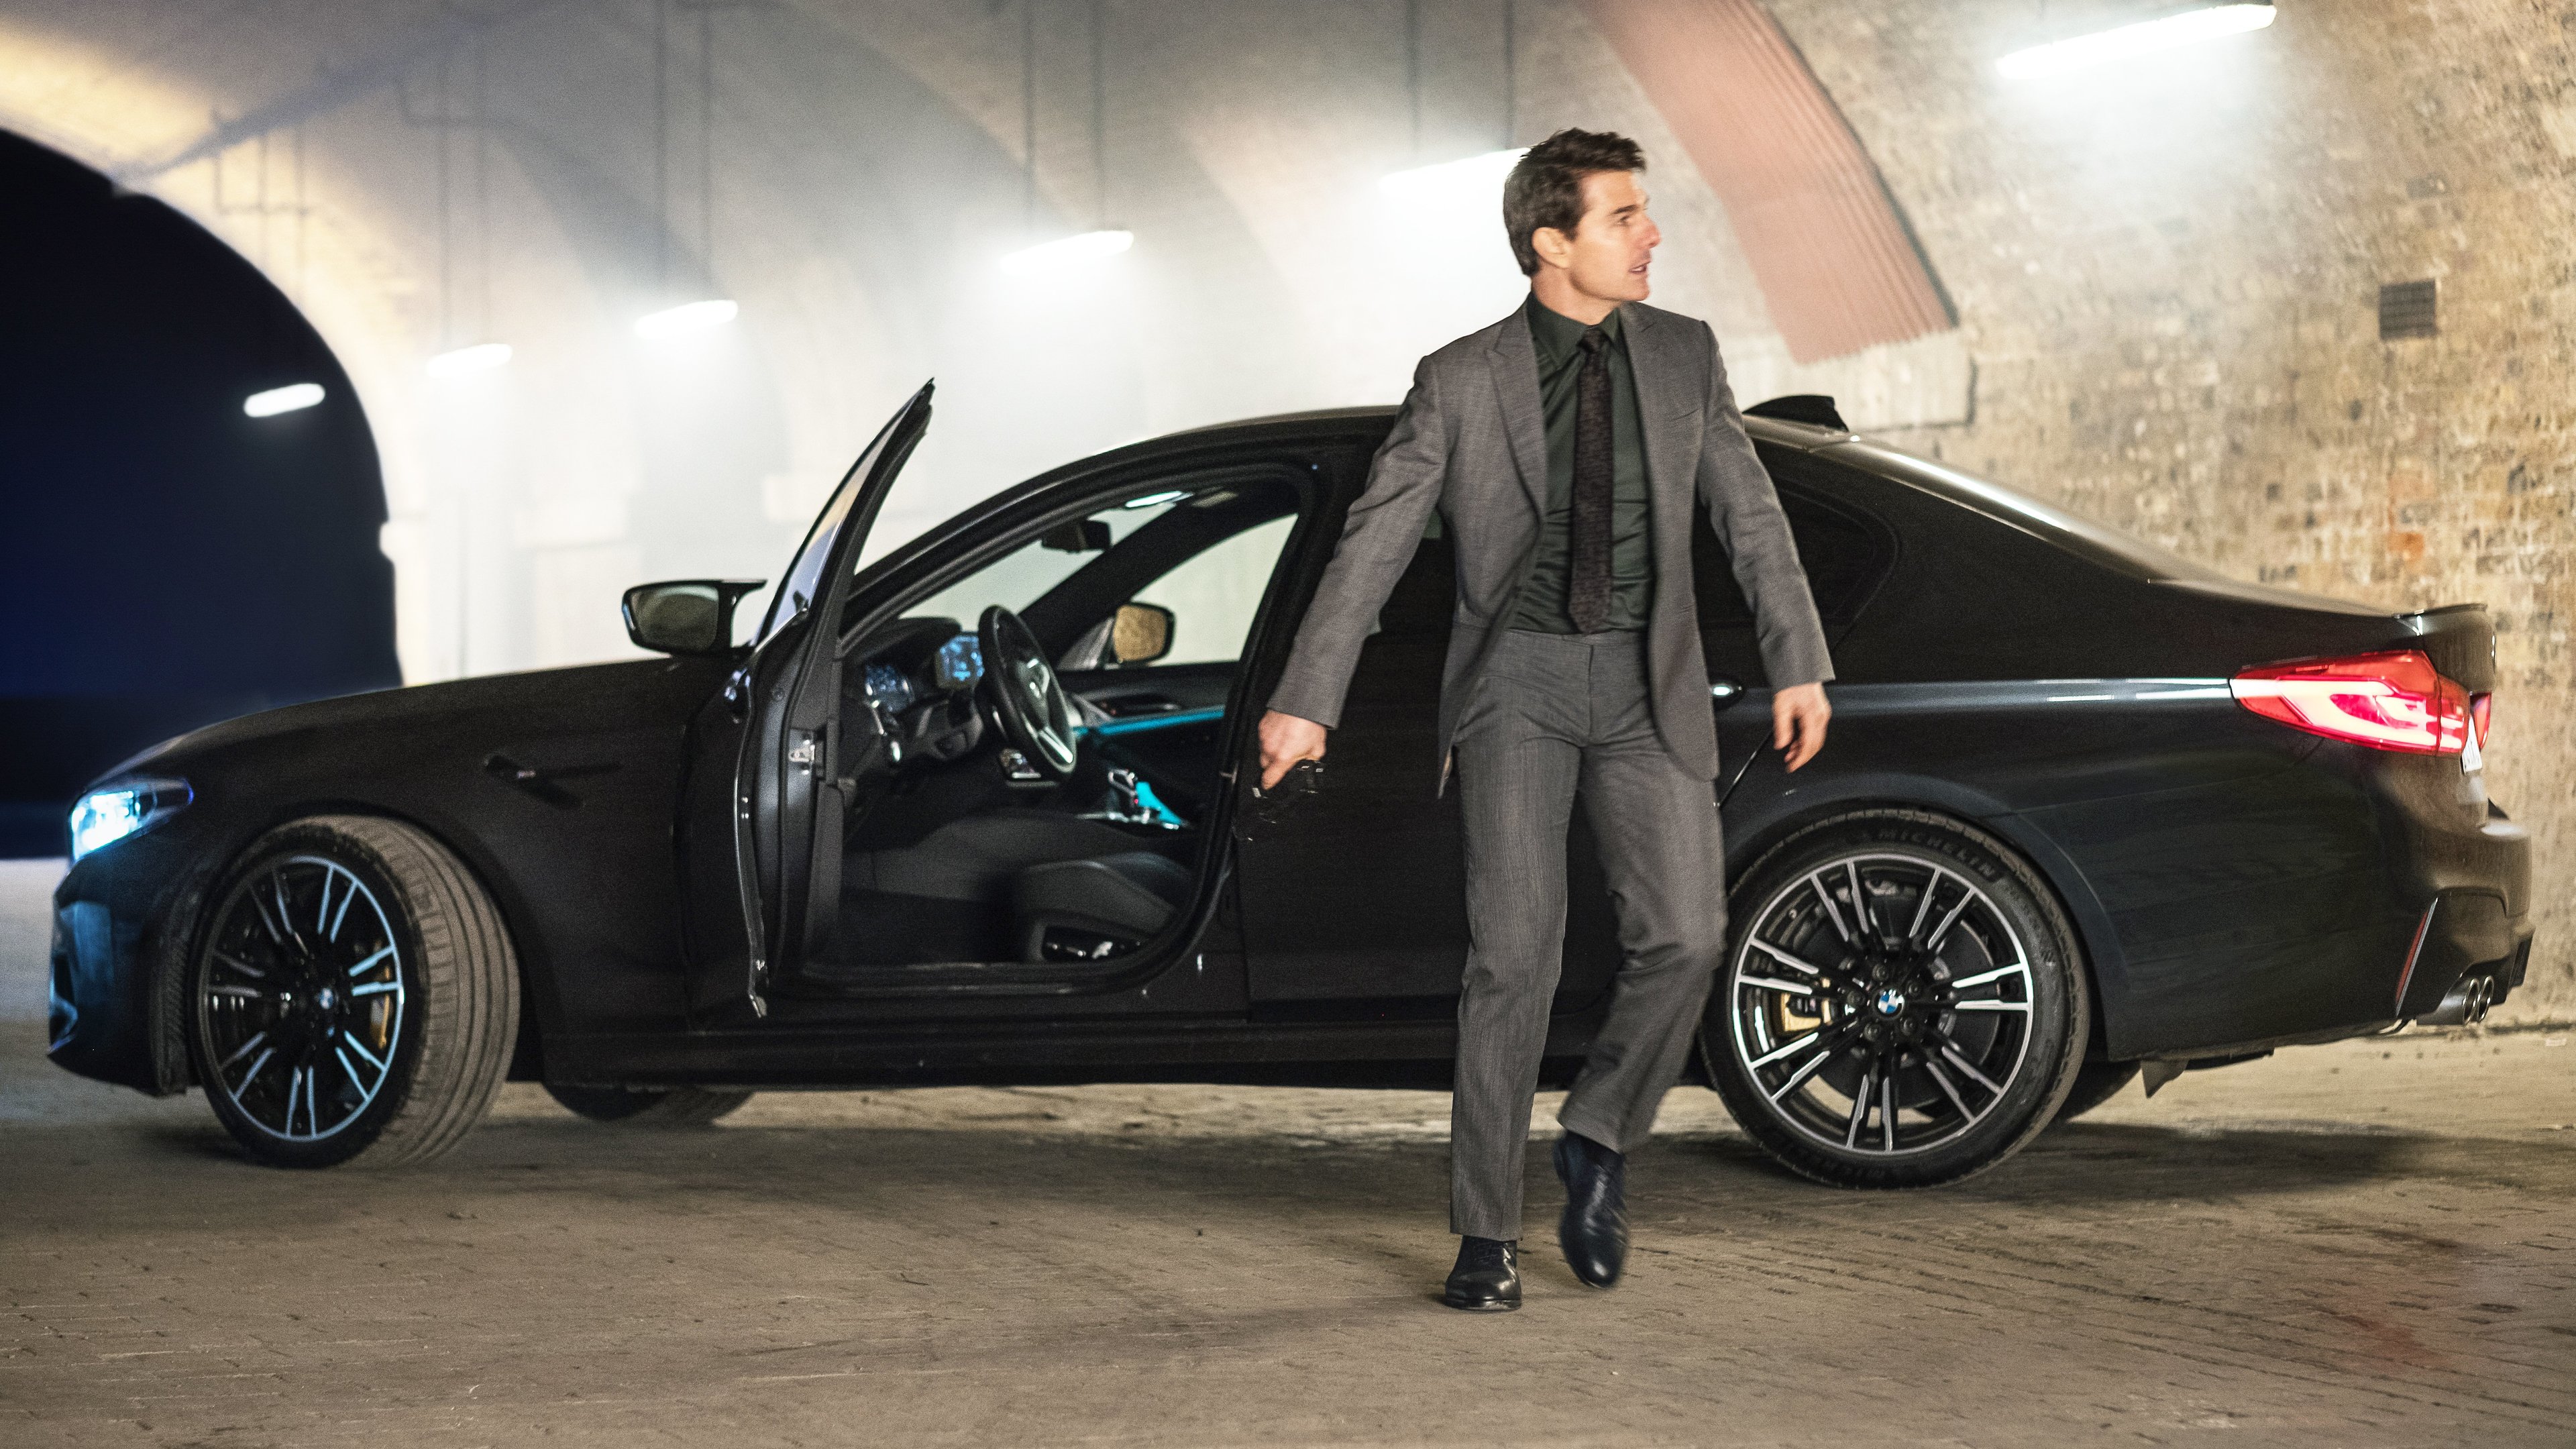 Wallpaper 4k Tom Cruise Mission Impossible Fallout Bmw M5 2018 Movies Wallpaper, 4k Wallpaper, 5k Wallpaper, Bmw M5 Wallpaper, Hd Wallpaper, Mission Impossible 6 Wallpaper, Mission Impossible Fallout Wallpaper, Movies Wallpaper, Tom Cruise